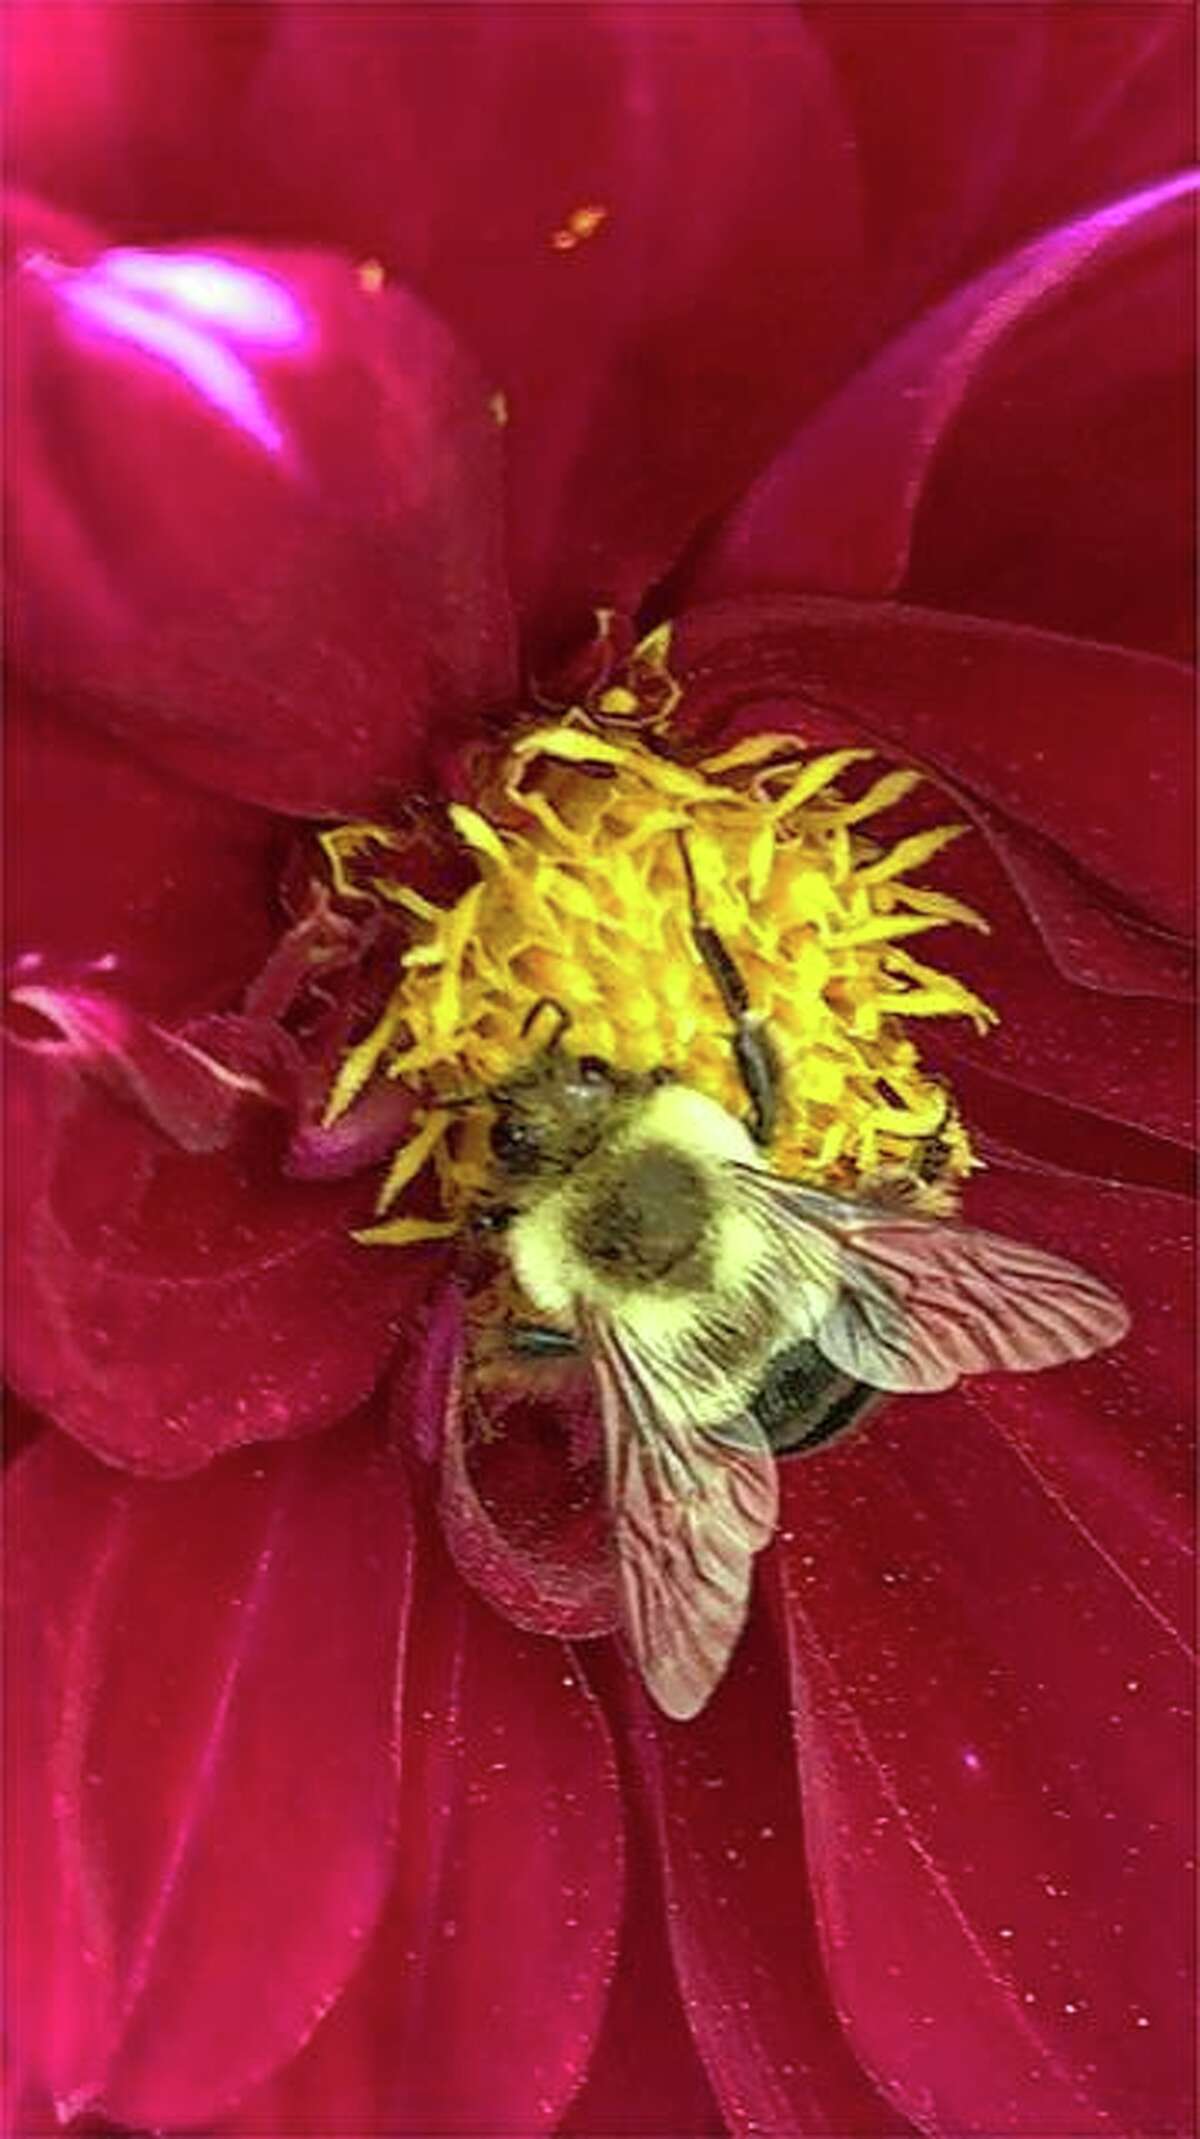 A bee gathers nectar from a late-blooming dahlia.